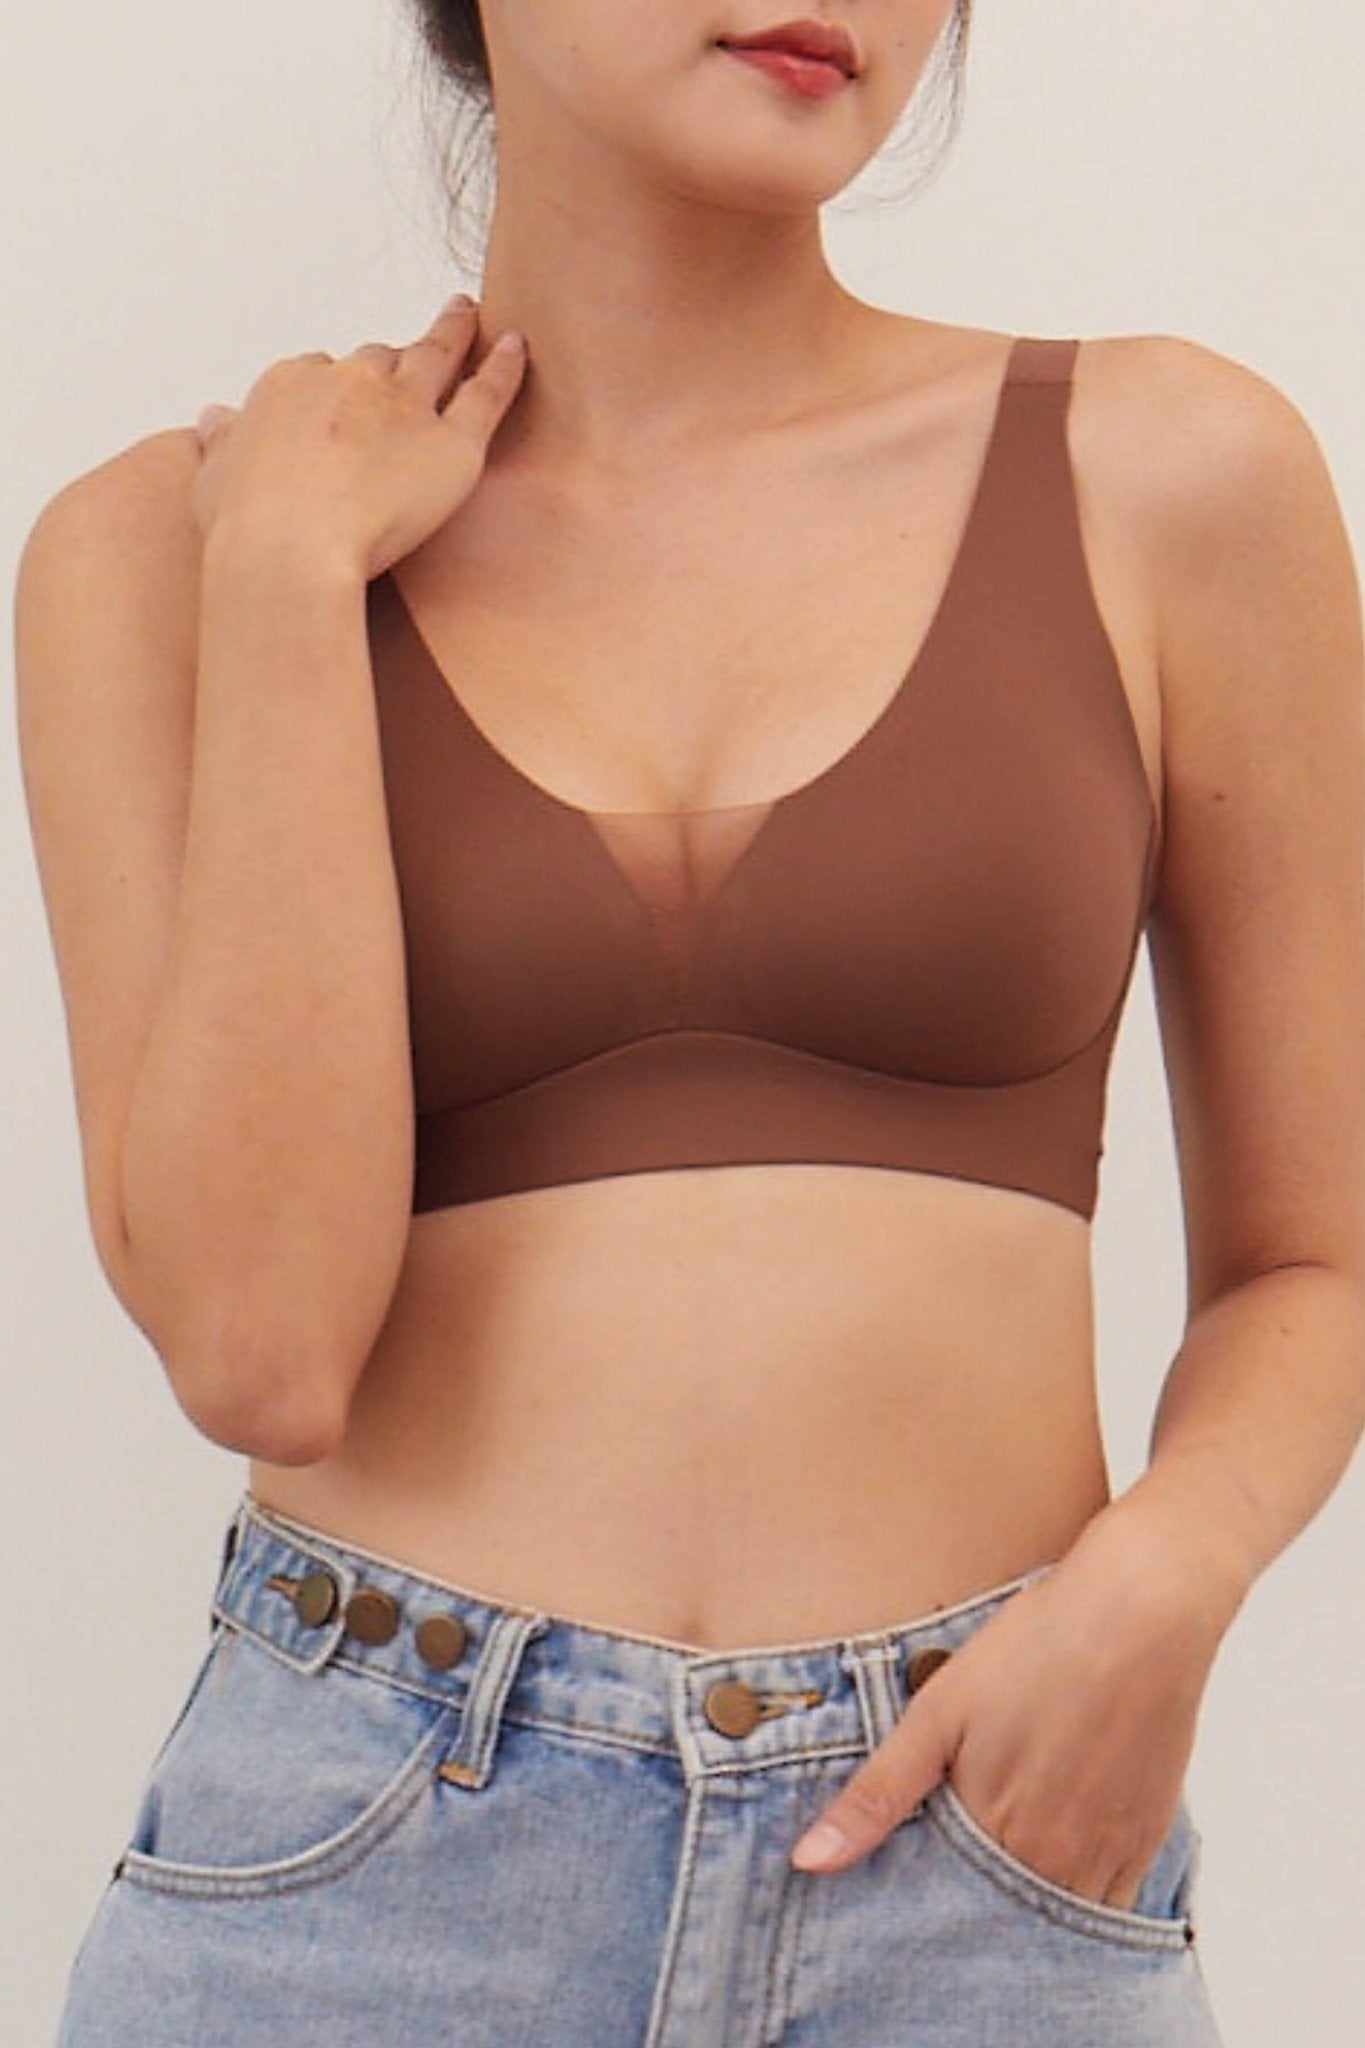 Routine Seamless Perfect Uplifting Bra In Color Bundle - Adelais Official